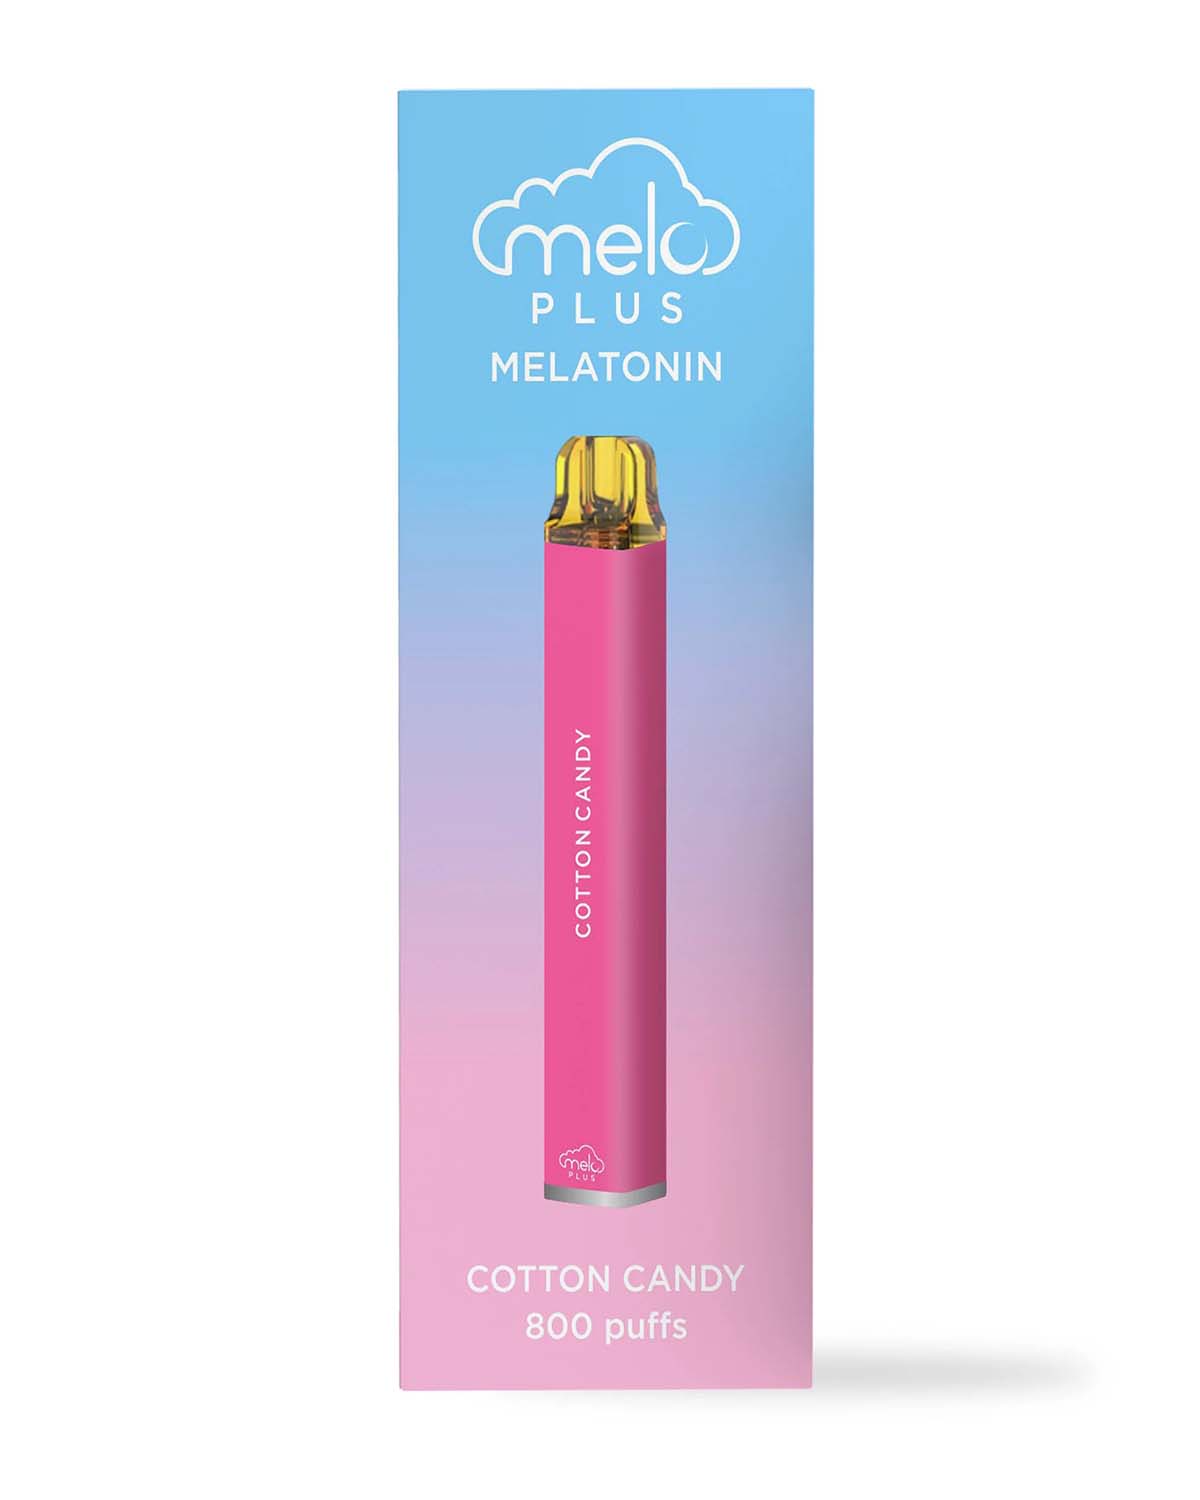 MELO Plus in Cotton Candy flavor